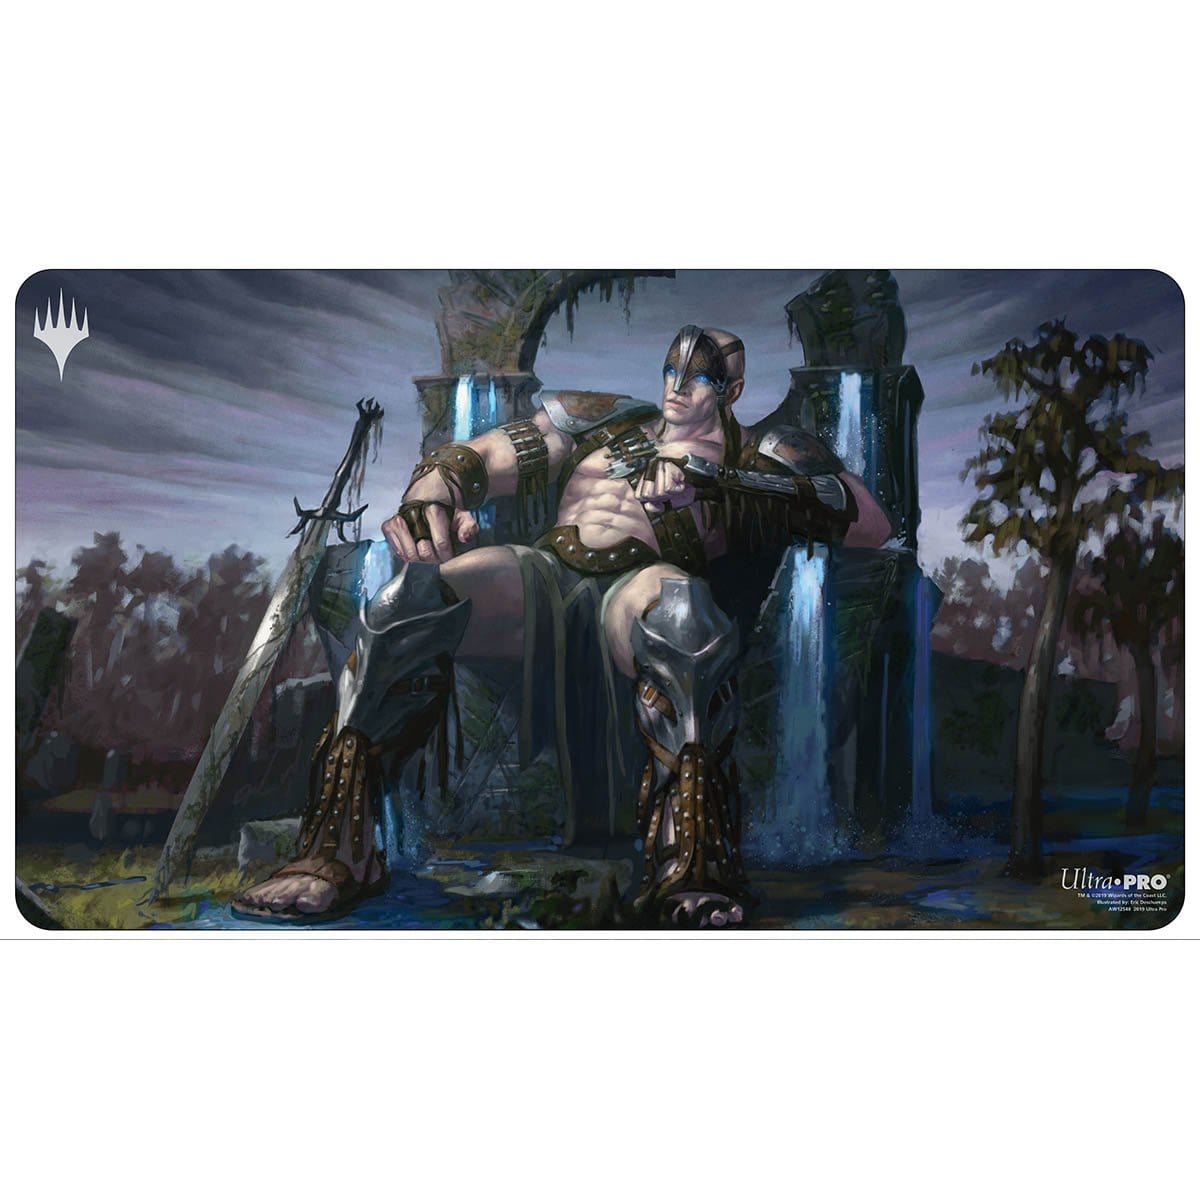 Oloro, Ageless Ascetic Playmat - Playmat - Original Magic Art - Accessories for Magic the Gathering and other card games